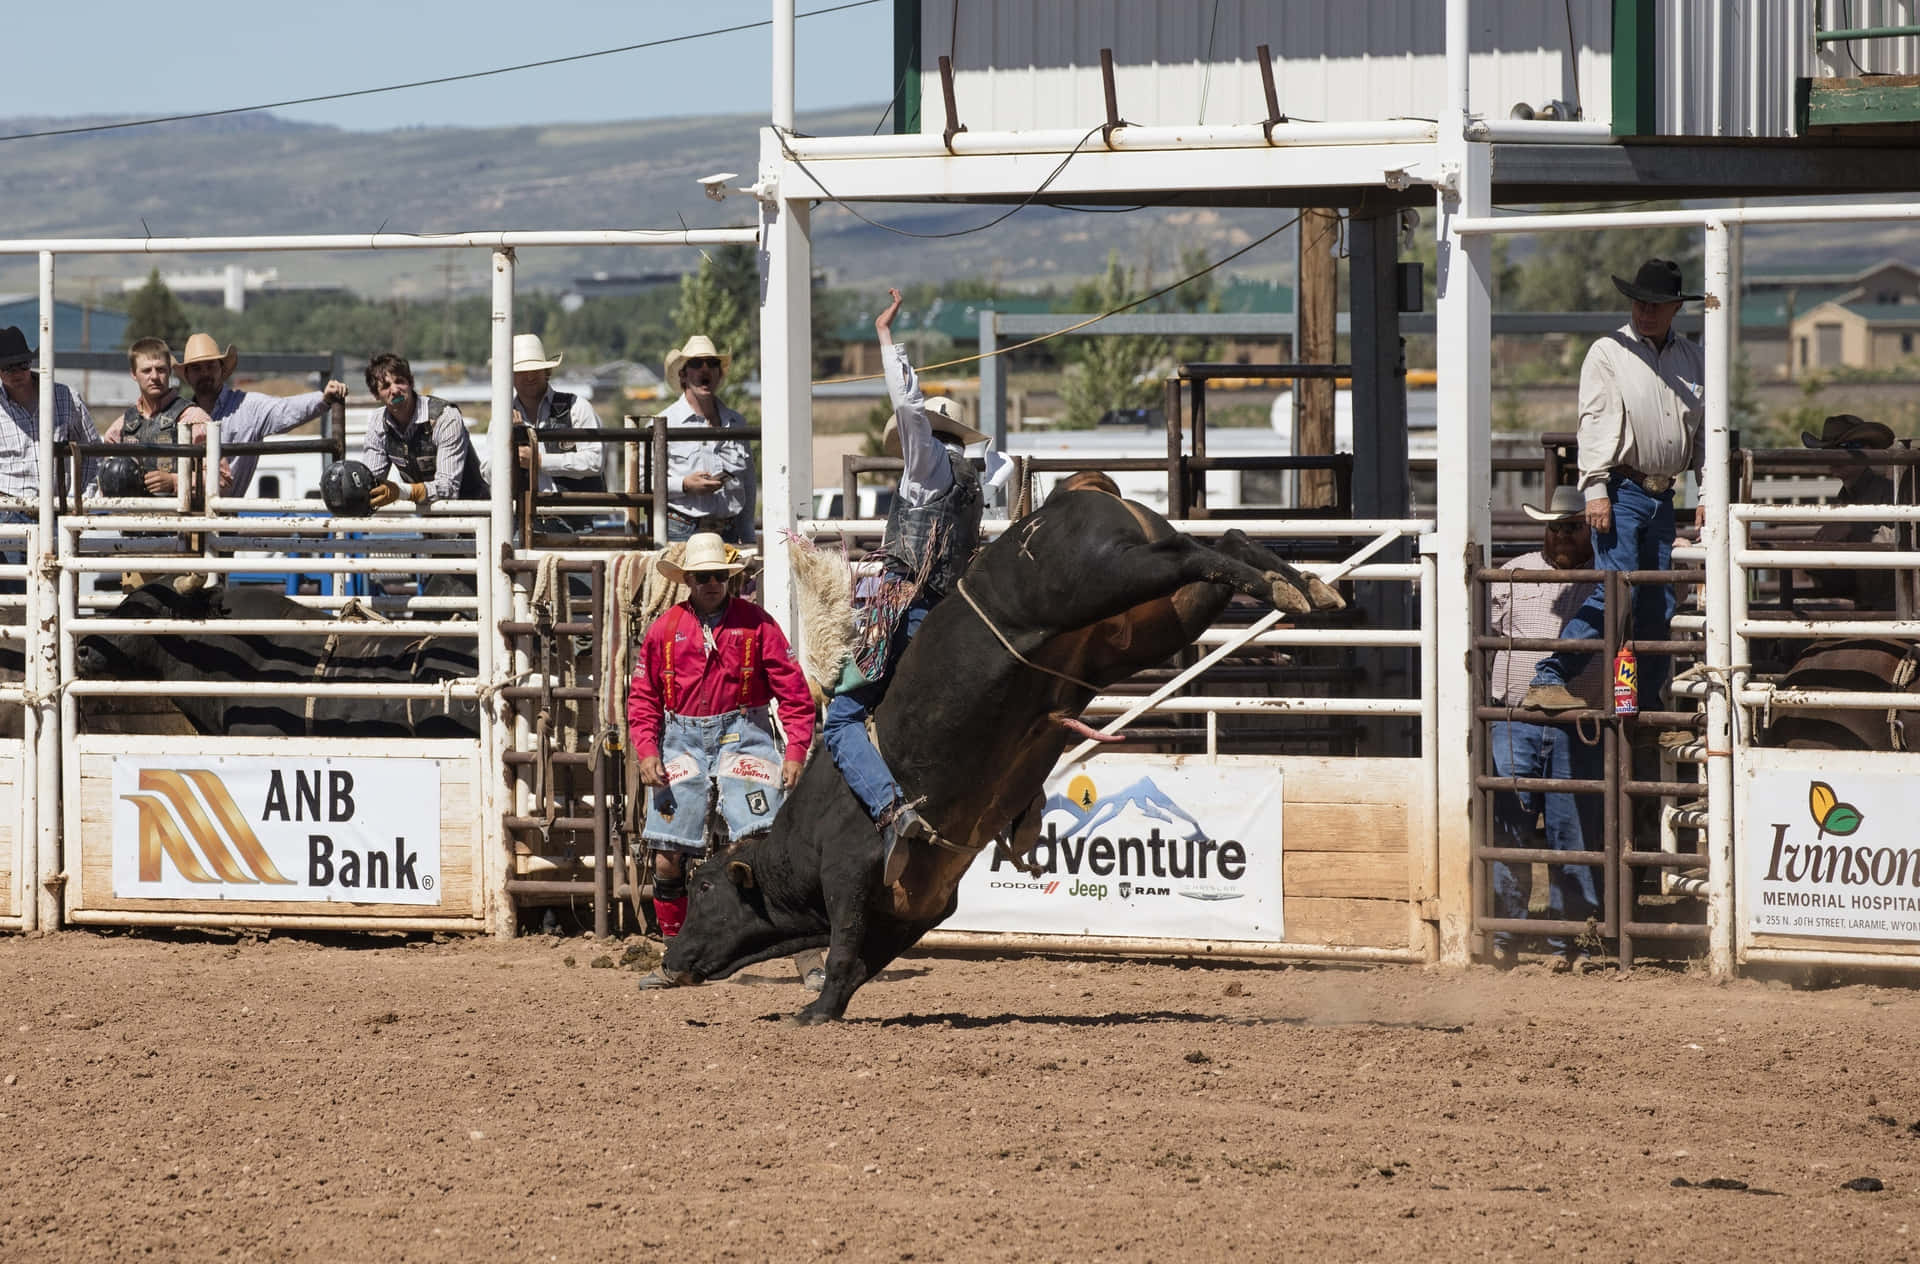 Exciting Rodeo Action Moment